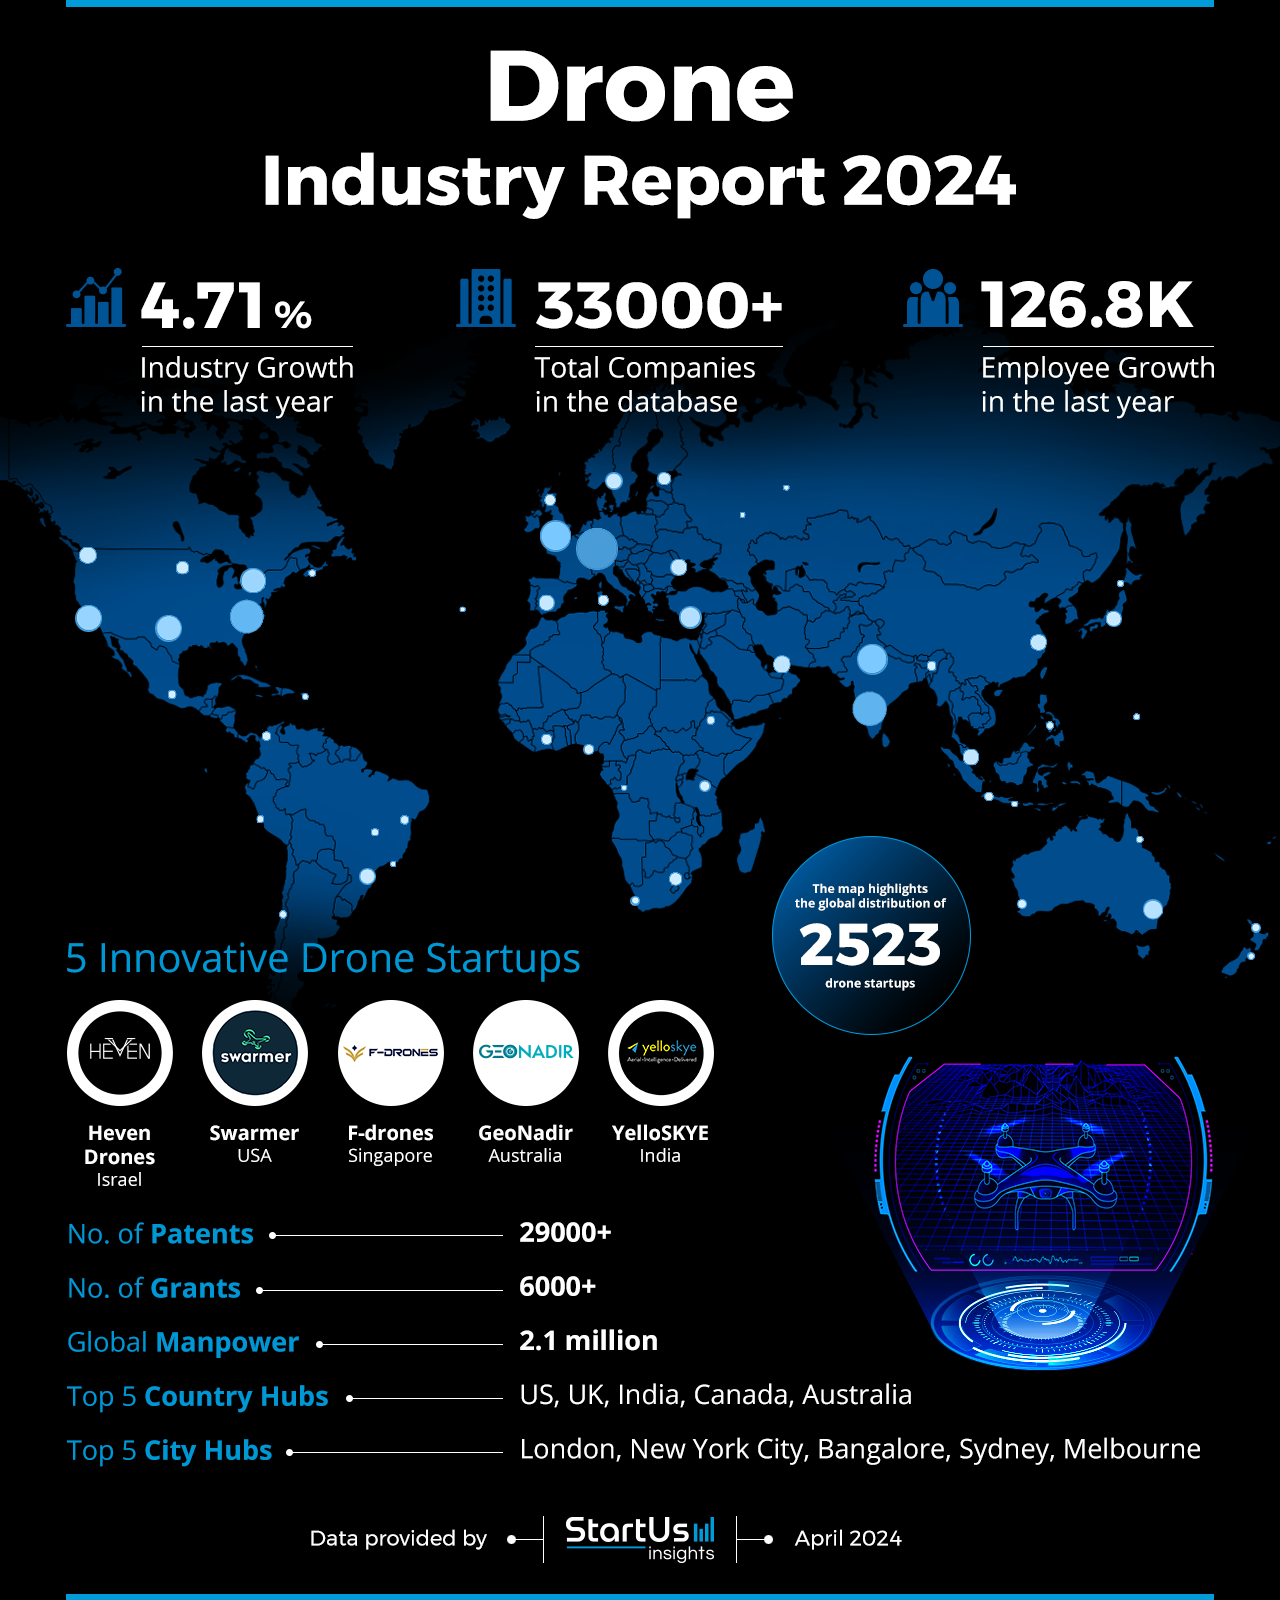 Drone-Industry-Report-HeatMap-StartUs-Insights-noresize